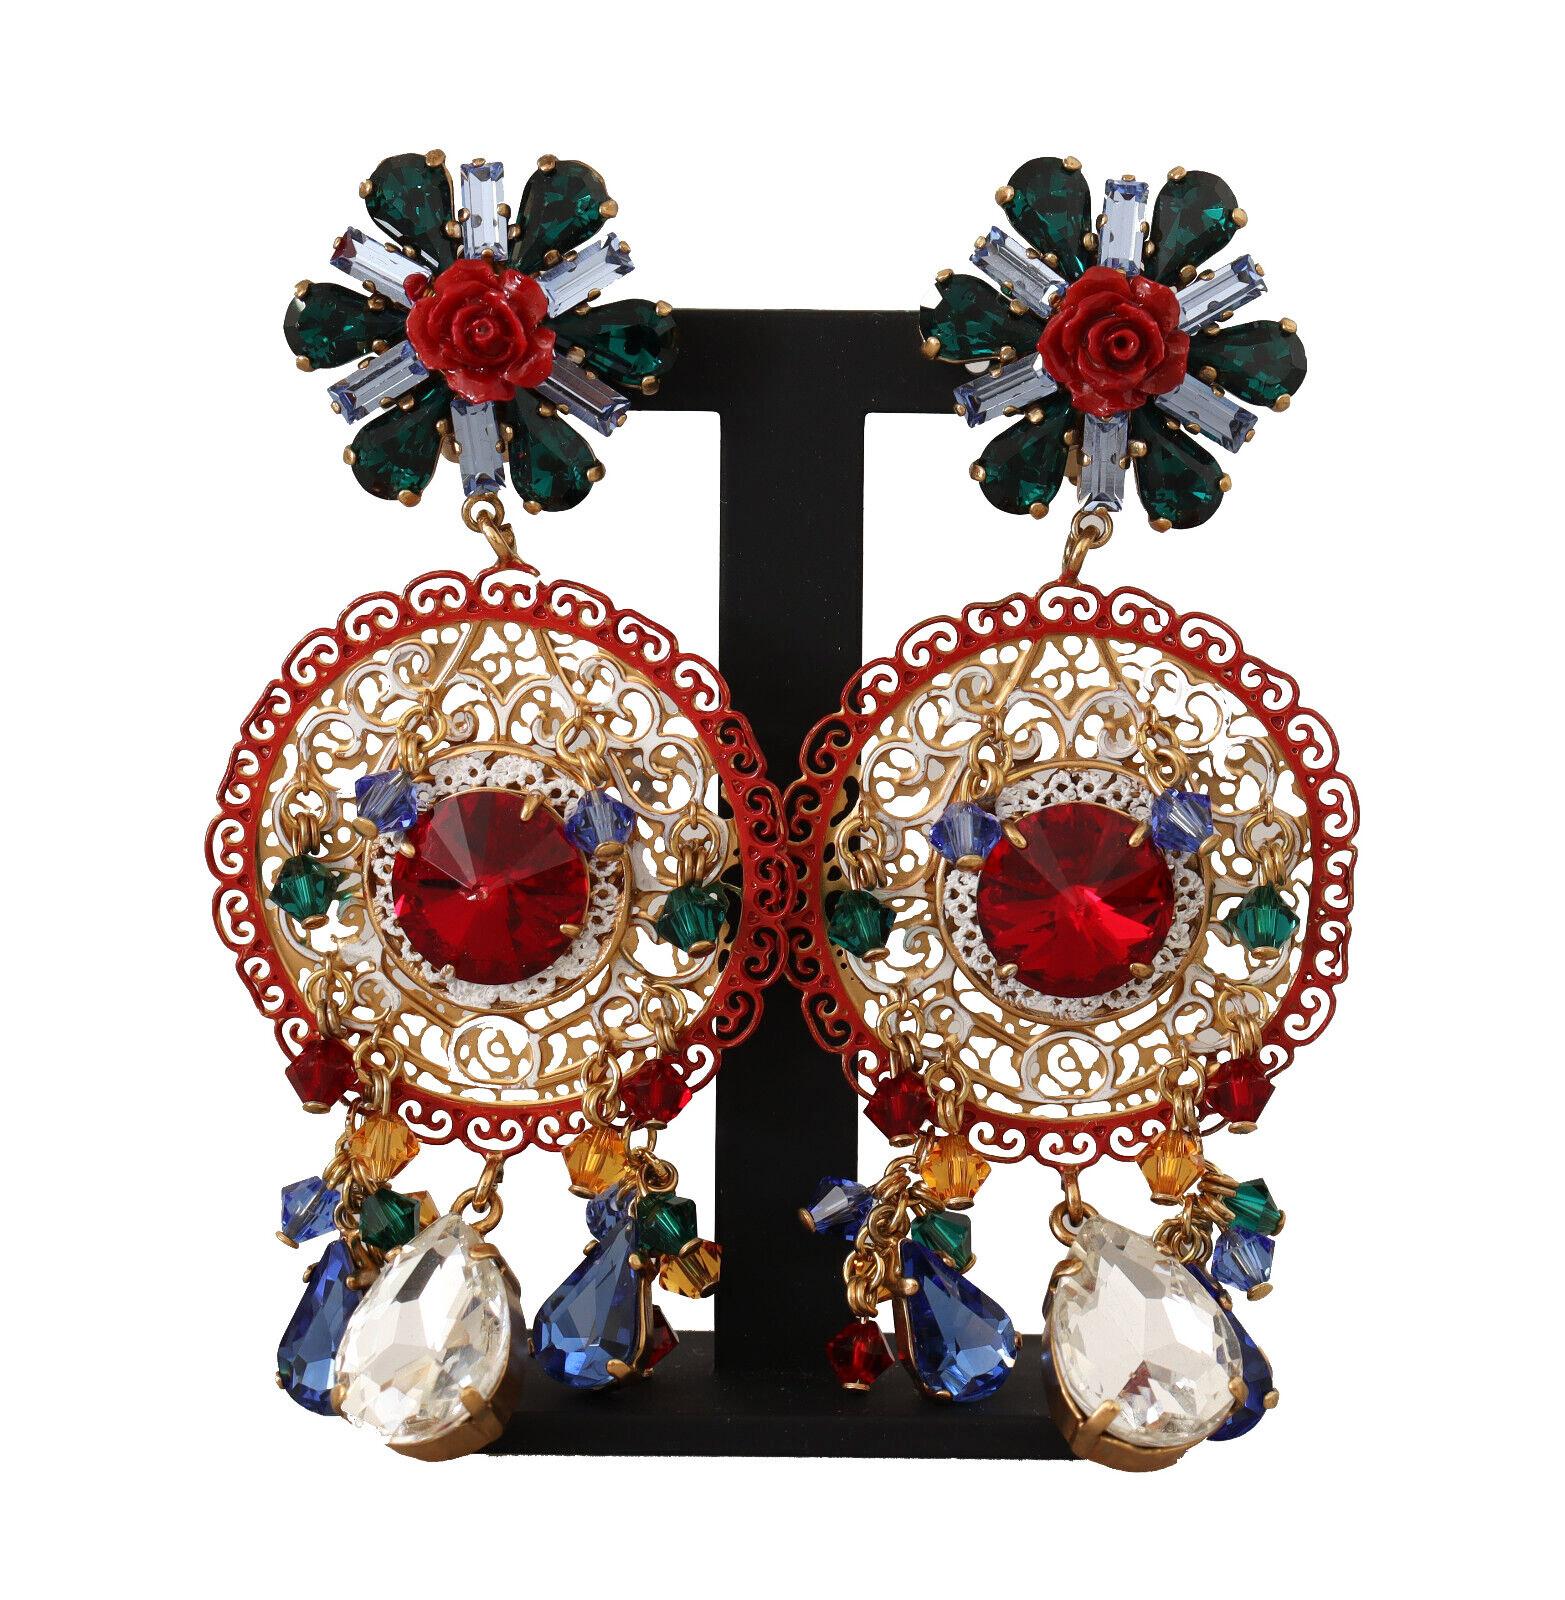 DOLCE & GABBANA

Gorgeous brand new with tags, 100% Authentic Dolce & Gabbana Earrings.



Model: Clip-on Dangling
Motive: Carretto
Material: 60% Brass, 30% Glass, 10% Crystal

Color: Gold
Crystals: Multicolor

Logo details
Made in Italy

Length: